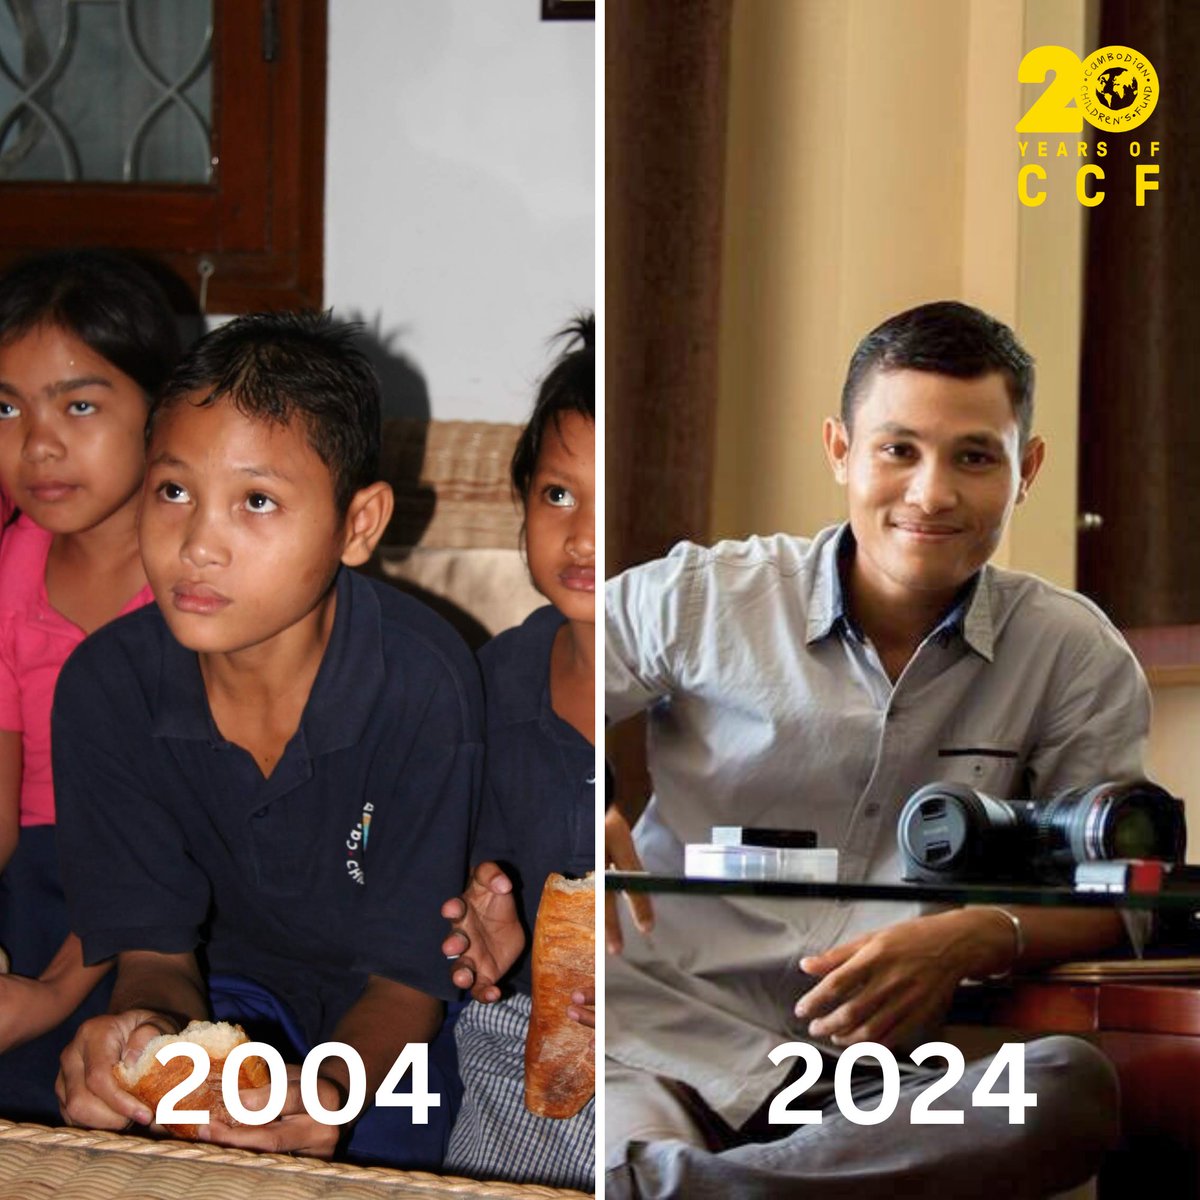 We are thrilled to share Nhanh's incredible 20-year CCF journey. Over the course of two decades, he has undergone a remarkable transformation, evolving from a boy scavenging on the garbage dump to a talented filmmaker. #20YearsofCCF #TomorrowsLeaders #SDG1 #Youthleadership